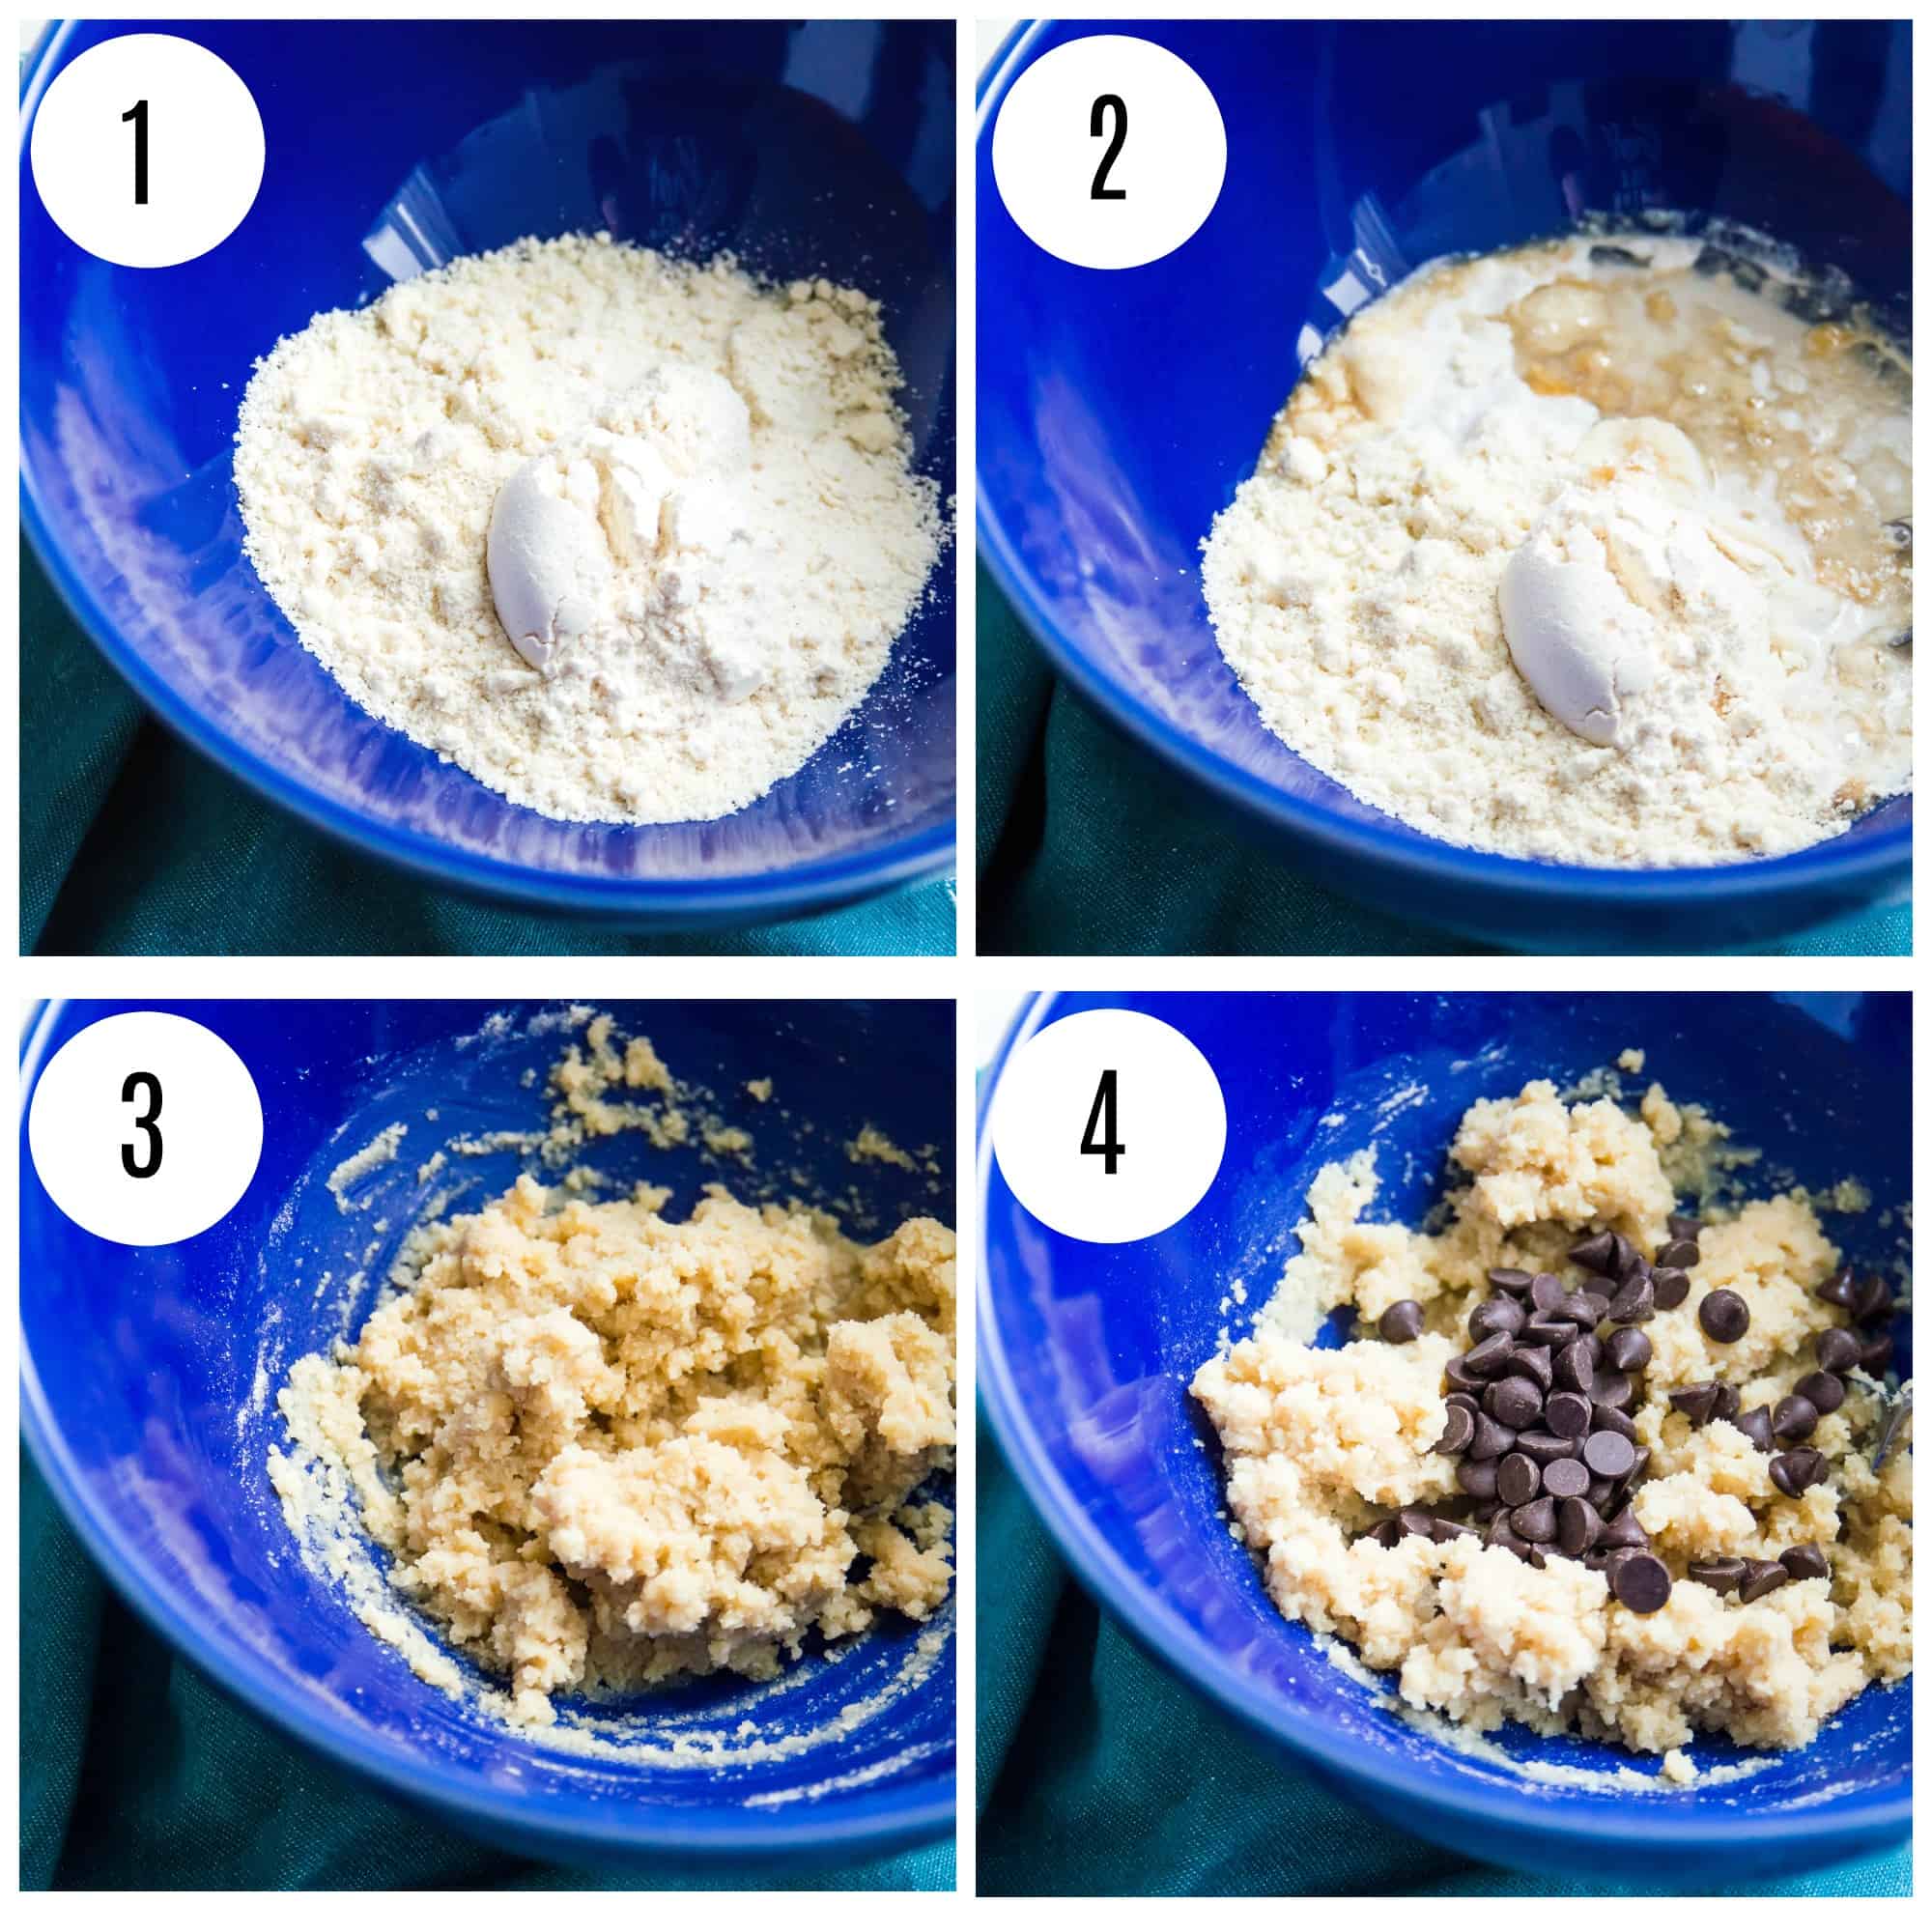 Step by step directions for making edible cookie dough.